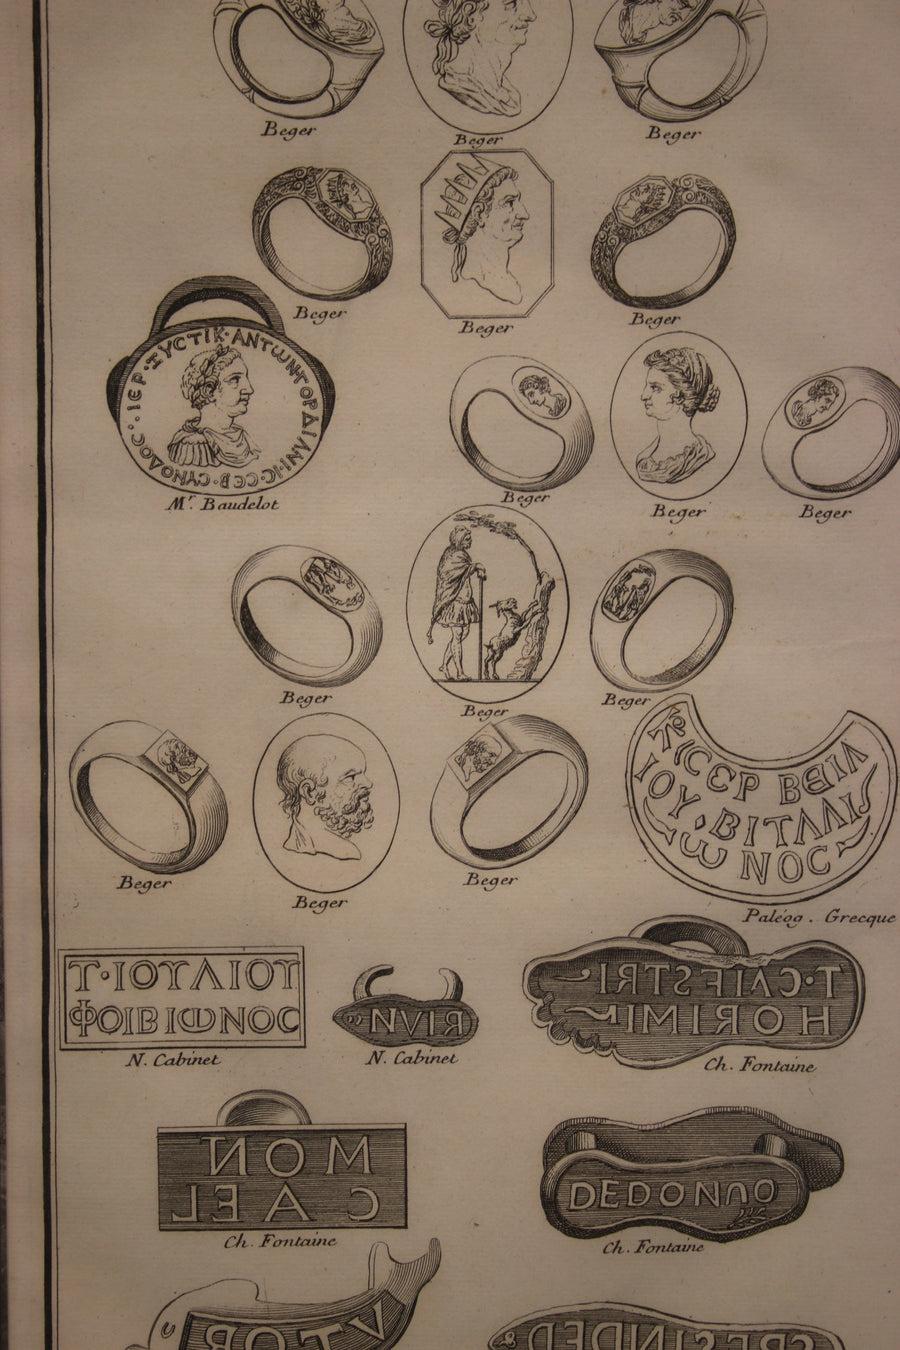 19th Printing Stamp Rings from an Apprentice Book 2

A 19th French print from a student book or examples book for making signet rings.

We have 2 different ones in stock.

Height 52 cm, width 36 cm

We can send these for you.

Additional